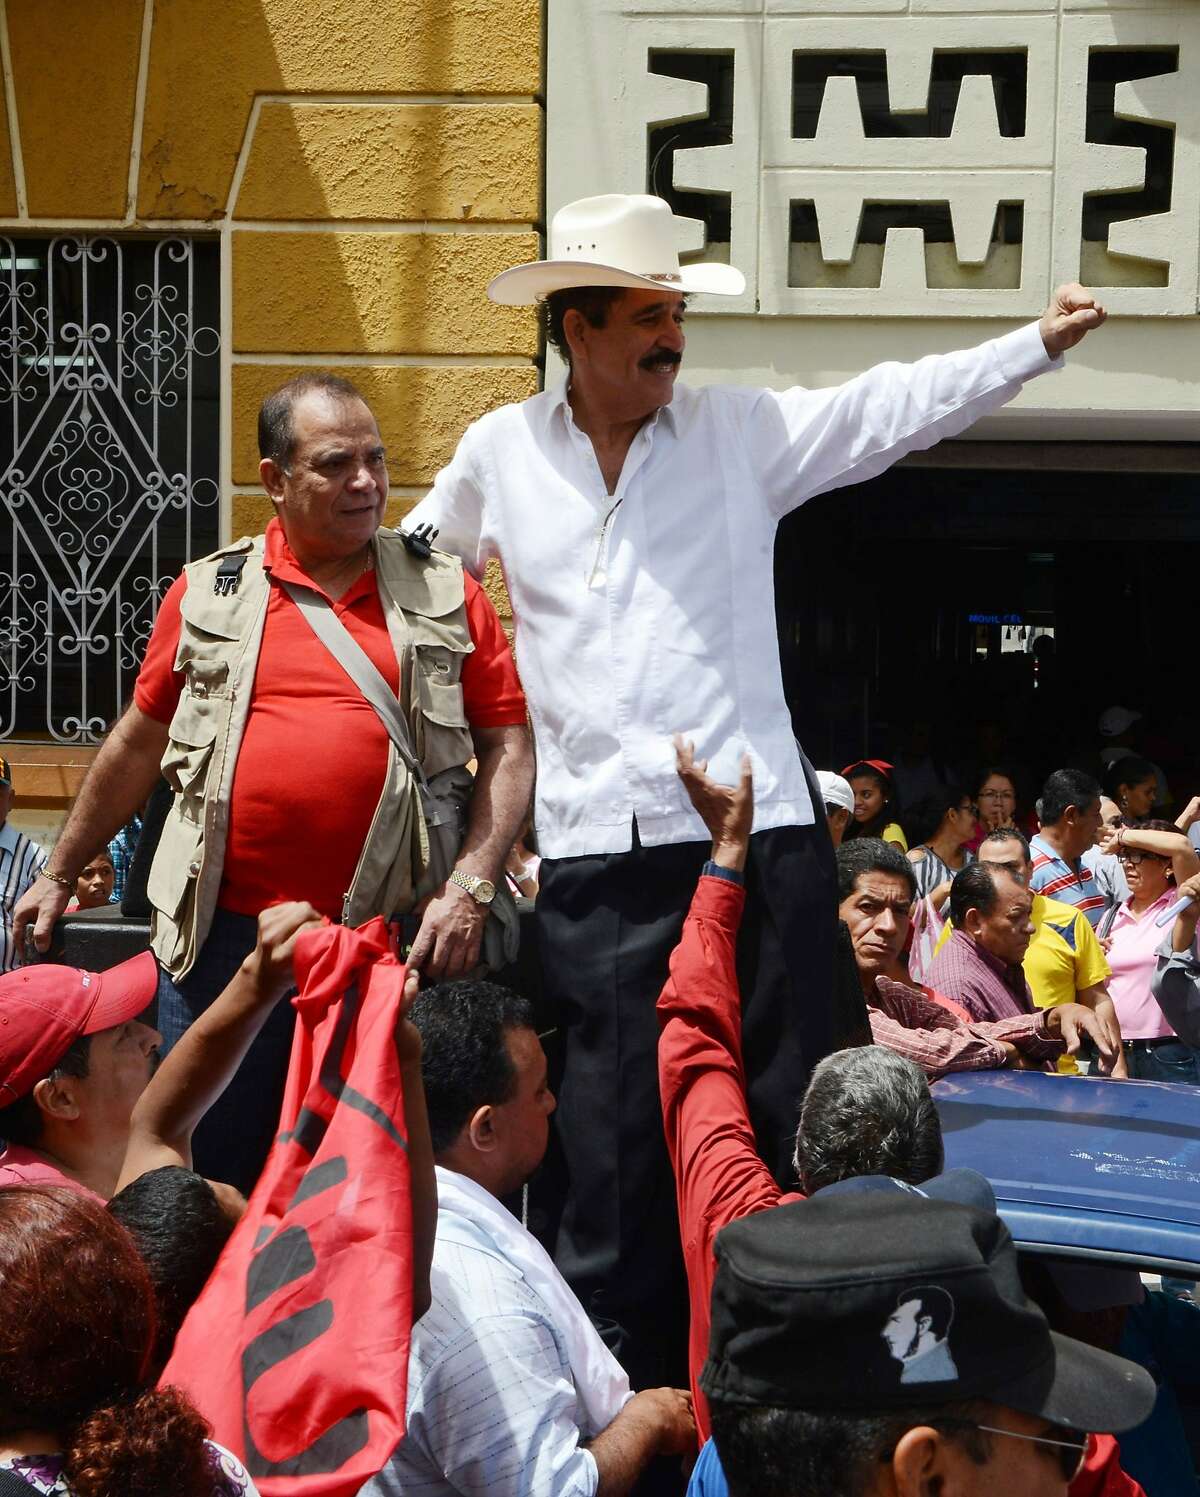 Honduras former President Manuel Zelaya (R) greets supporters of Libertad y Refundacion (LIBRE) and the Frente Nacional de Resistencia Popular (FNRP) parties during n a rally to commemorate five years of the coup which ousted him, in Tegucigalpa, on Juen 28, 2014. AFP PHOTO/Orlando SIERRAORLANDO SIERRA/AFP/Getty Images